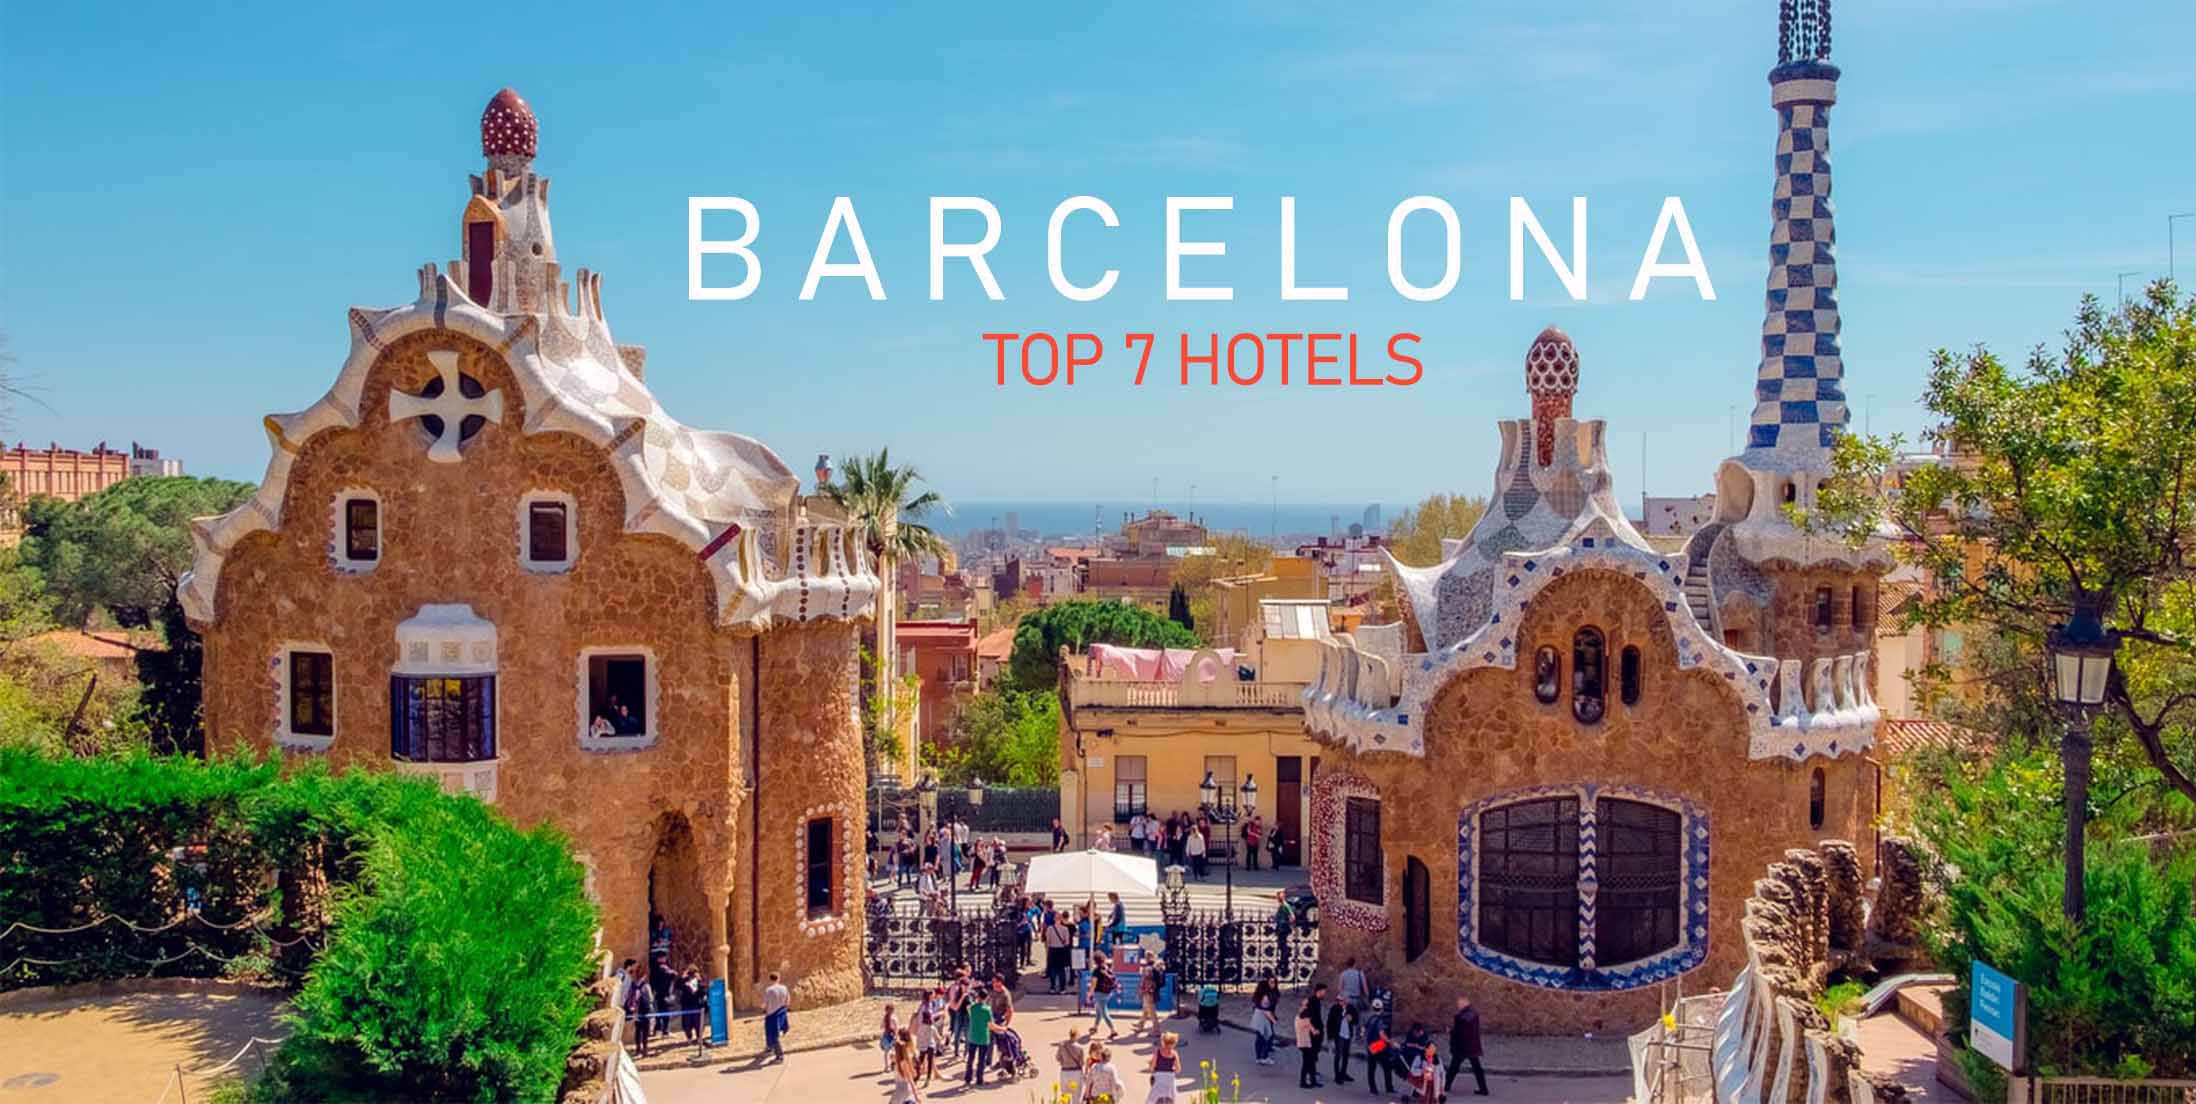 Top 7 Hotels in Barcelona for Groups